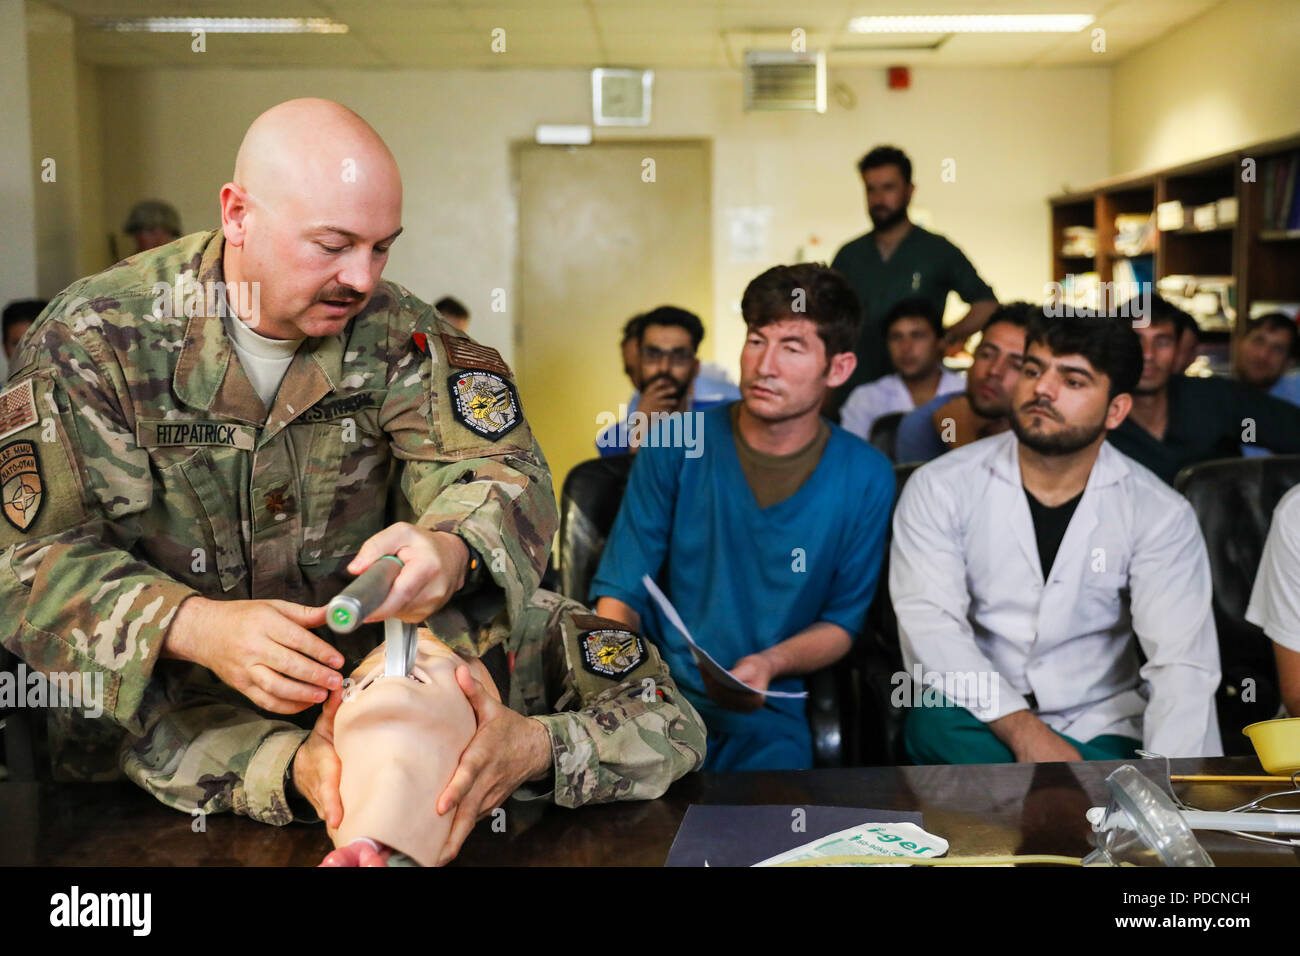 KANDAHAR PROVINCE, Afghanistan (August 5, 2018) --  U.S. Navy Lt. Cdr. Travis J. Fitzpatrick, senior nurse for Kandahar Airfield NATO Role III Multinational Medical Unit, demonstrates a technique on how to clear the airway of a patient, August 5, 2018, to Afghan medical staff members during a medical advisory visit at Kandahar Regional Military Hospital, Camp Hero in Kandahar, Afghanistan. Staff members from the Role III conduct routine visits to KRMH to train and advise Afghan medical staff. (U.S. Army photo by Staff Sgt. Neysa Canfield/TAAC-South Public Affairs) Stock Photo